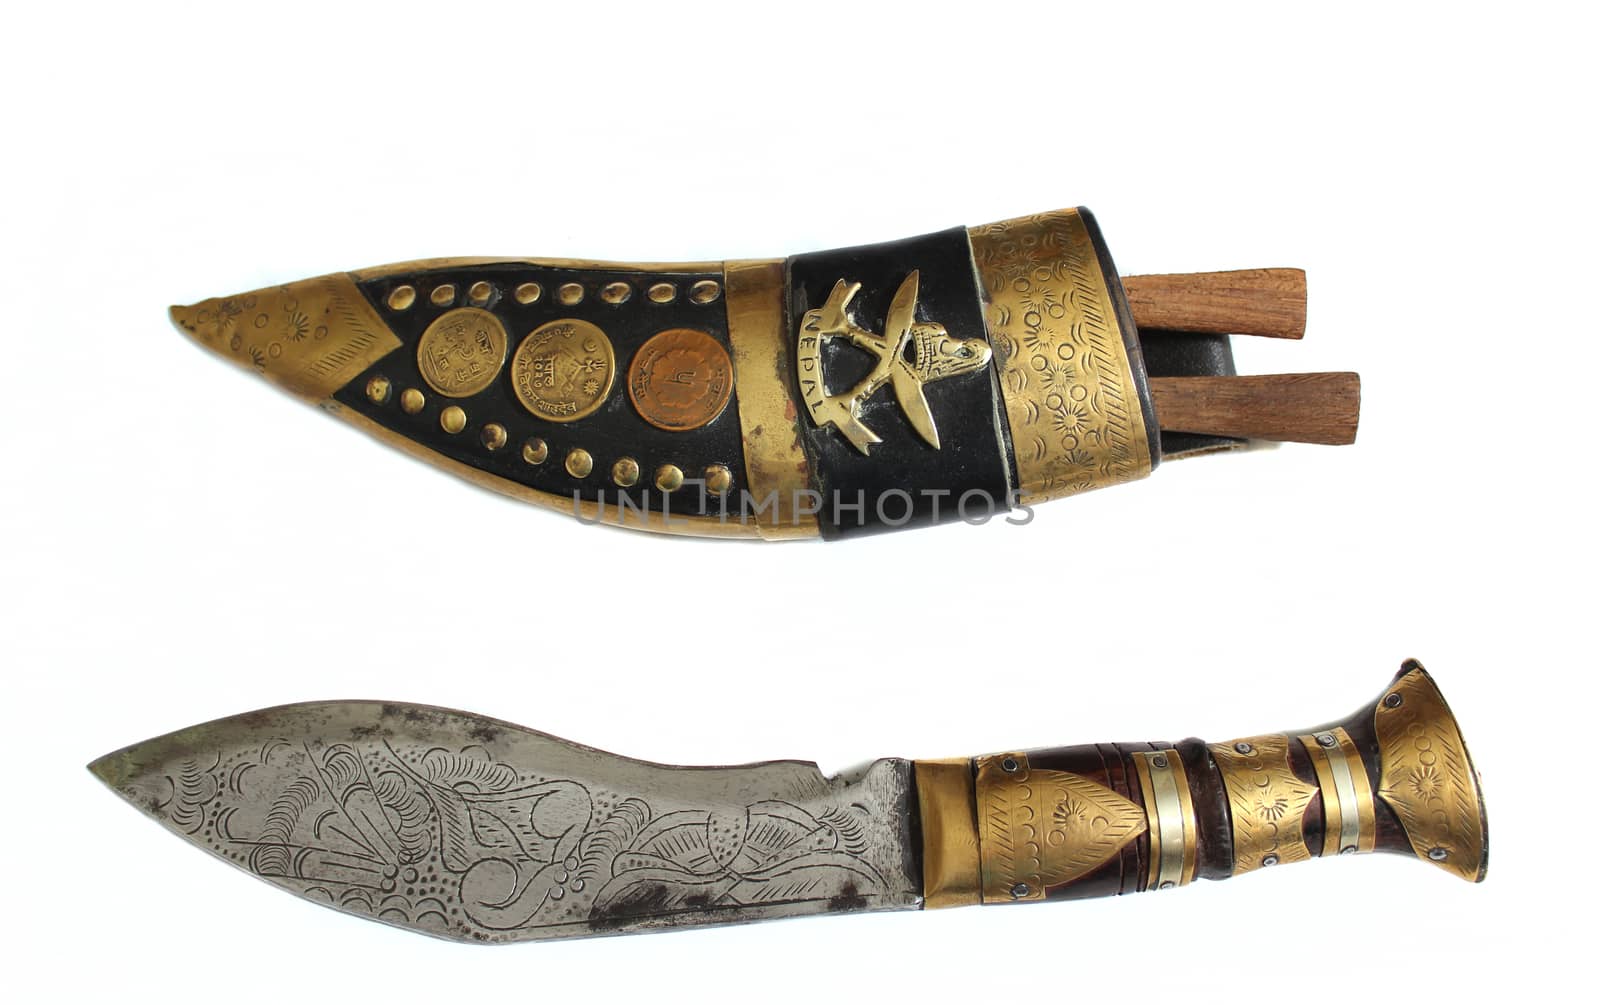 Antique Knife From Nepal on White Background Writing on Coins is government issue coin and monetary denomination